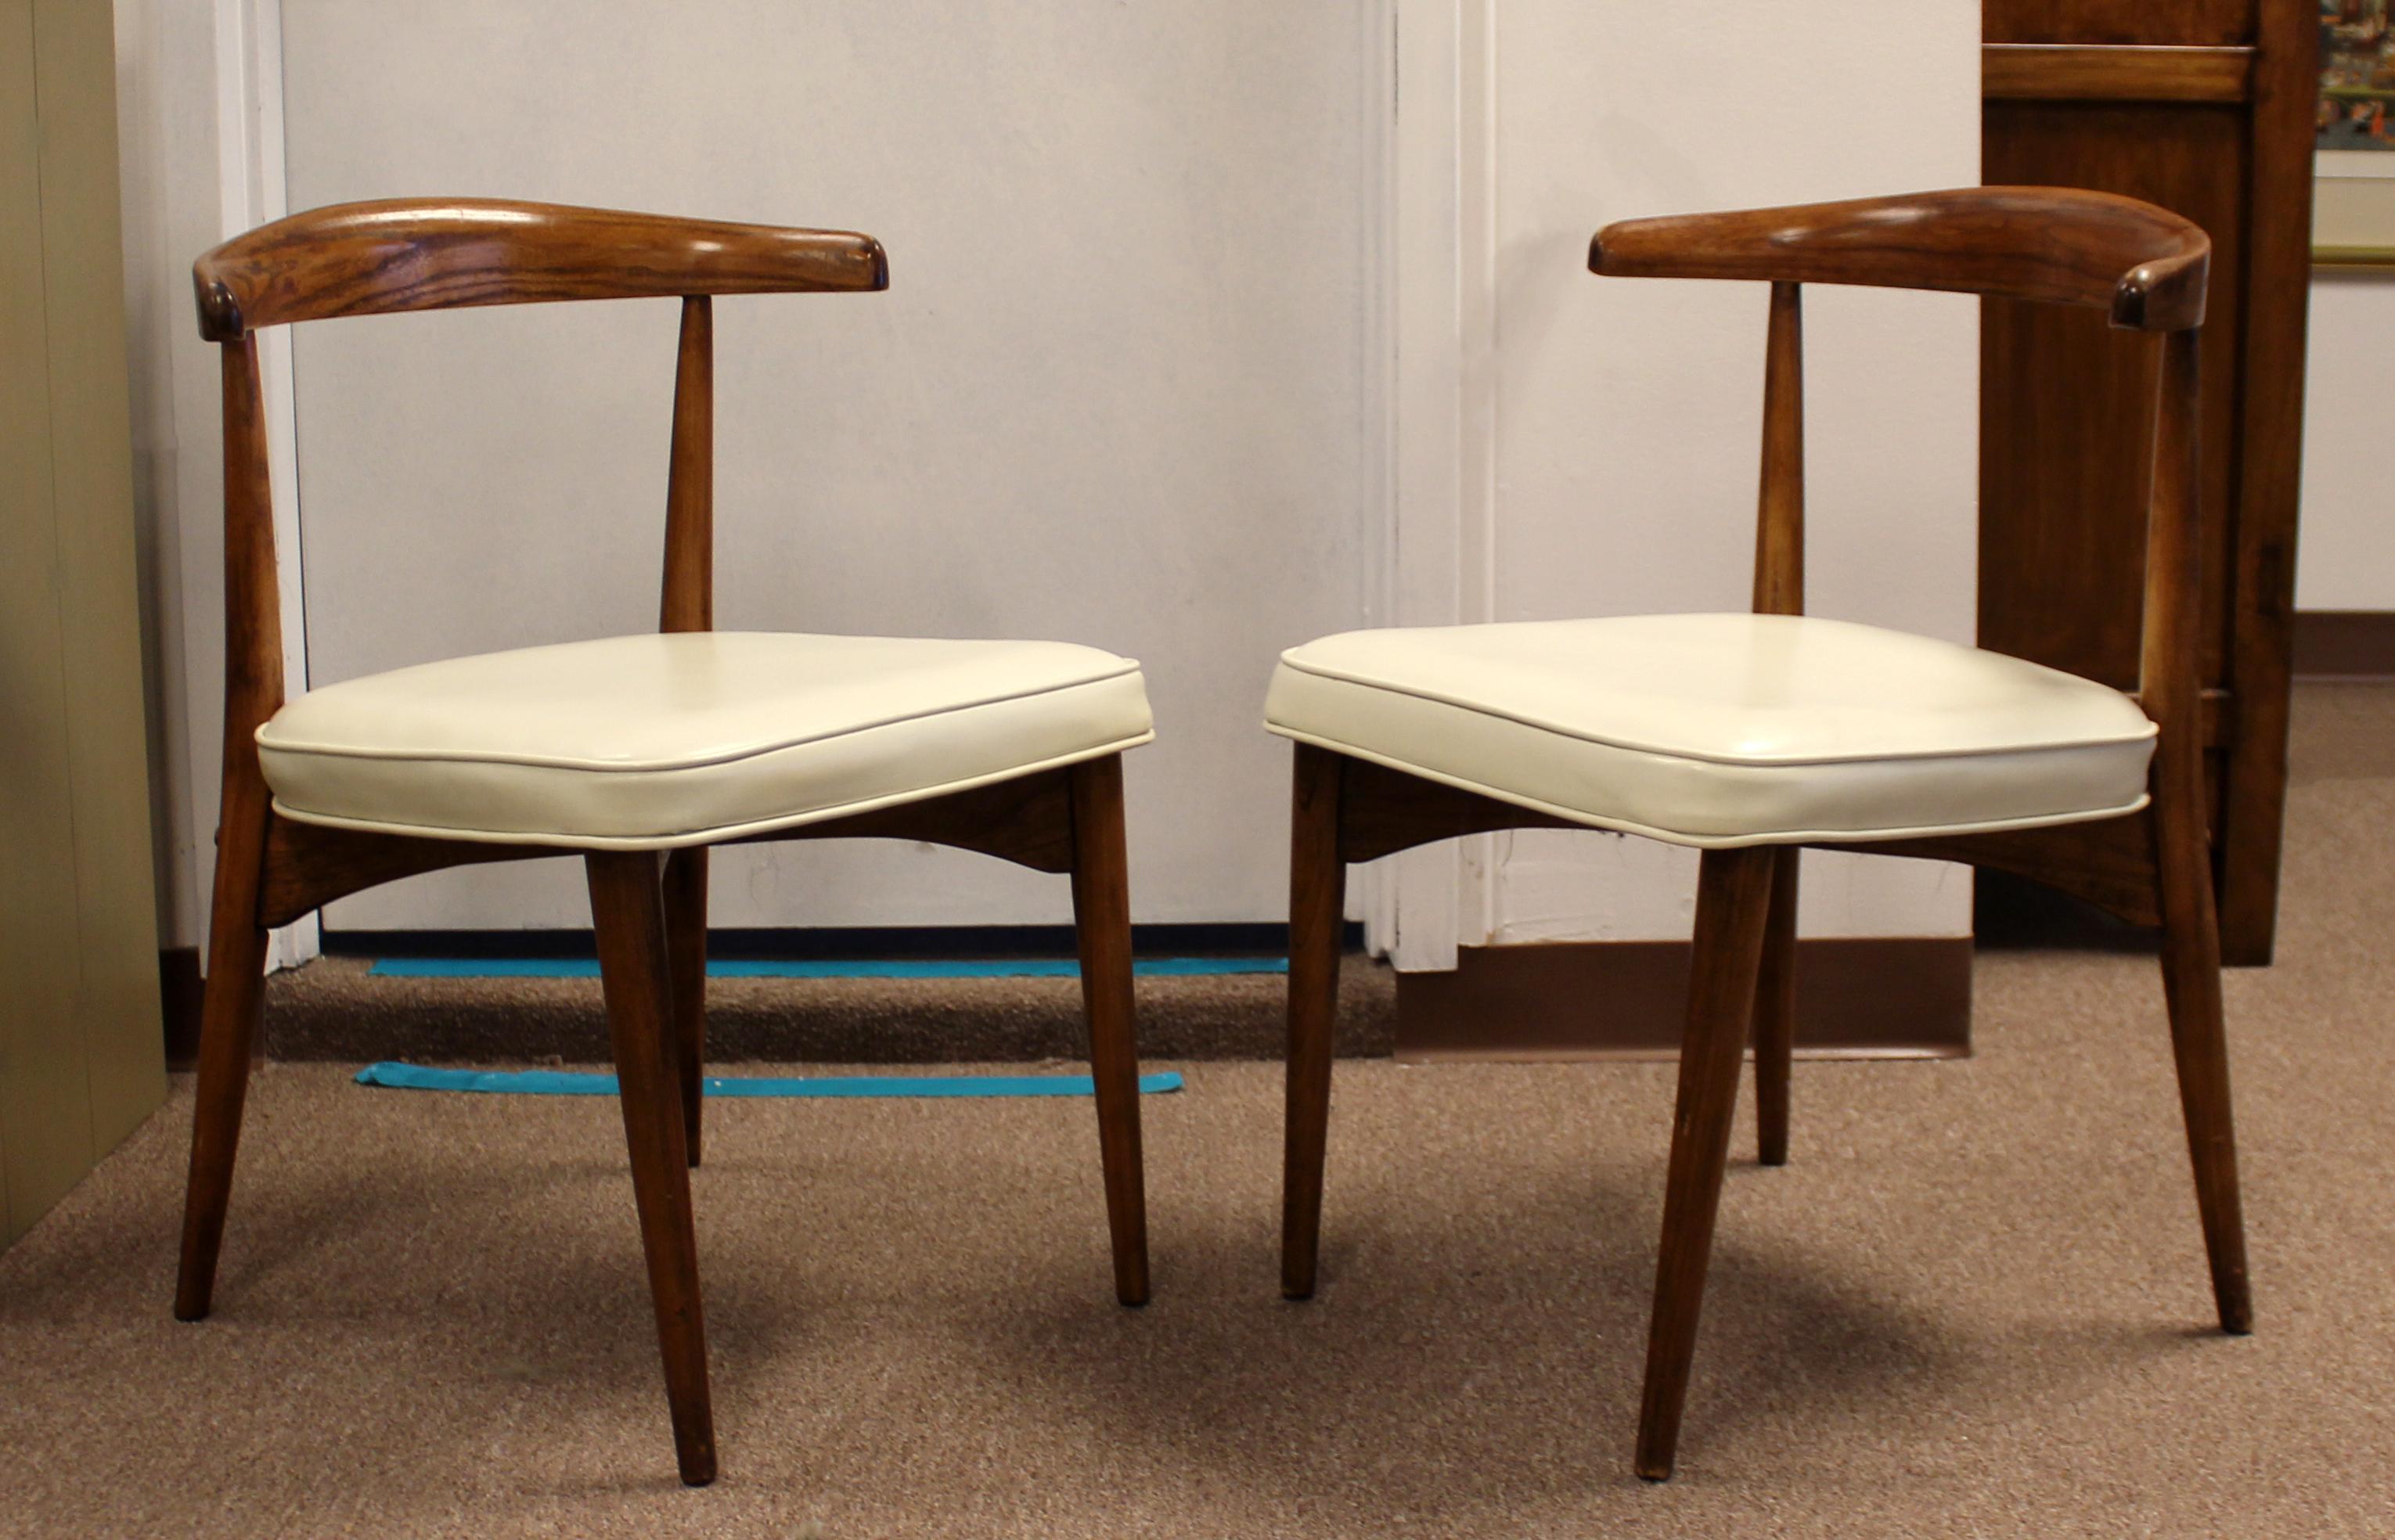 Mid-20th Century Mid-Century Modern Lawrence Peabody Craft Assoc. Dining Table and 6 Side Chairs